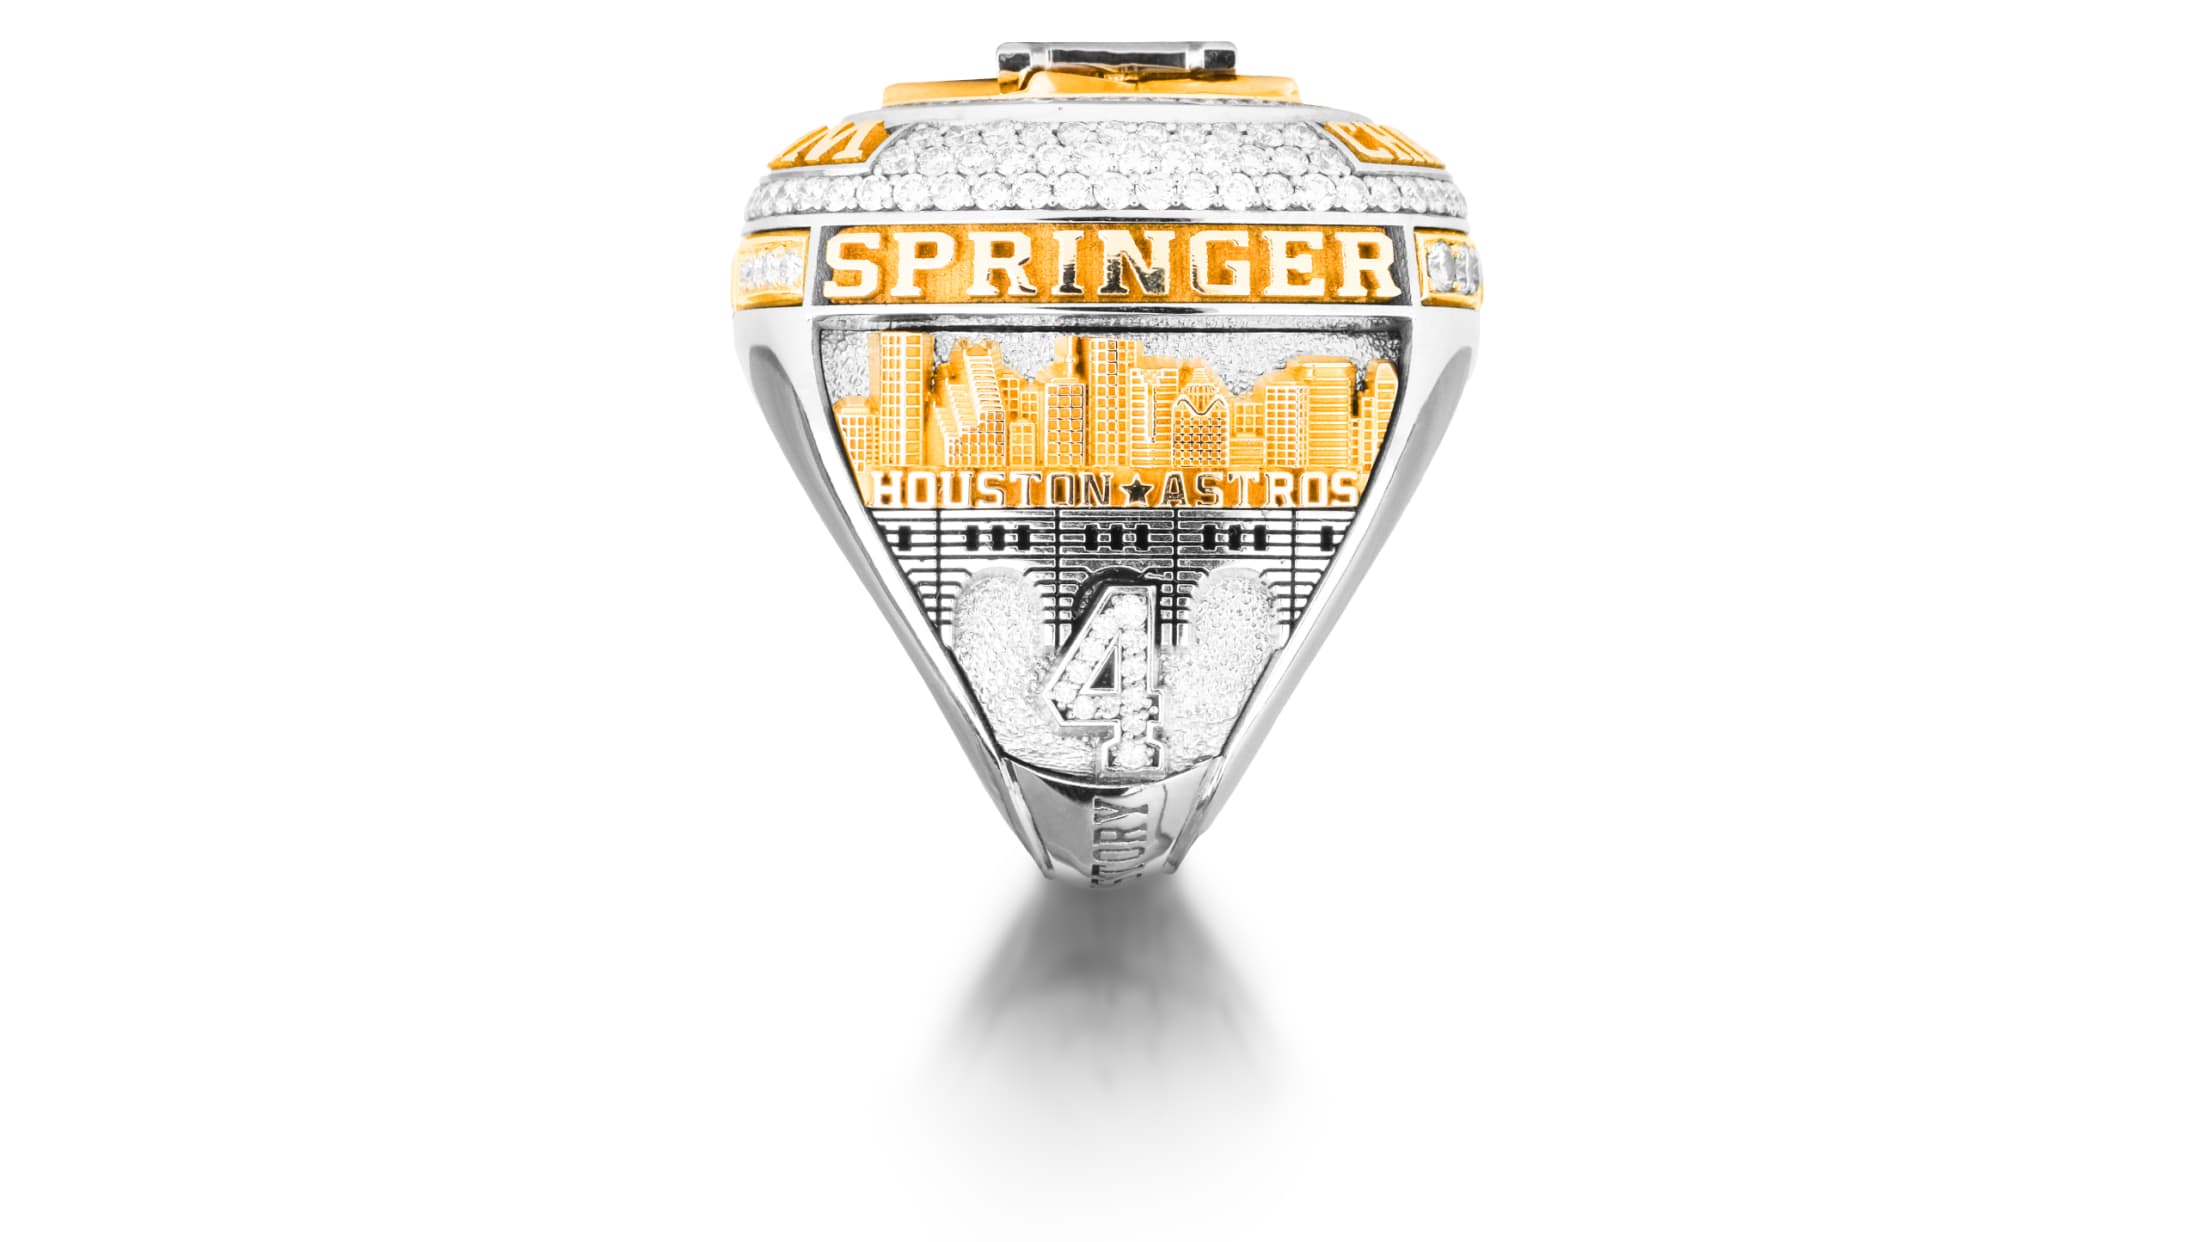 Houston Astros demand 2017 World Series ring be pulled from